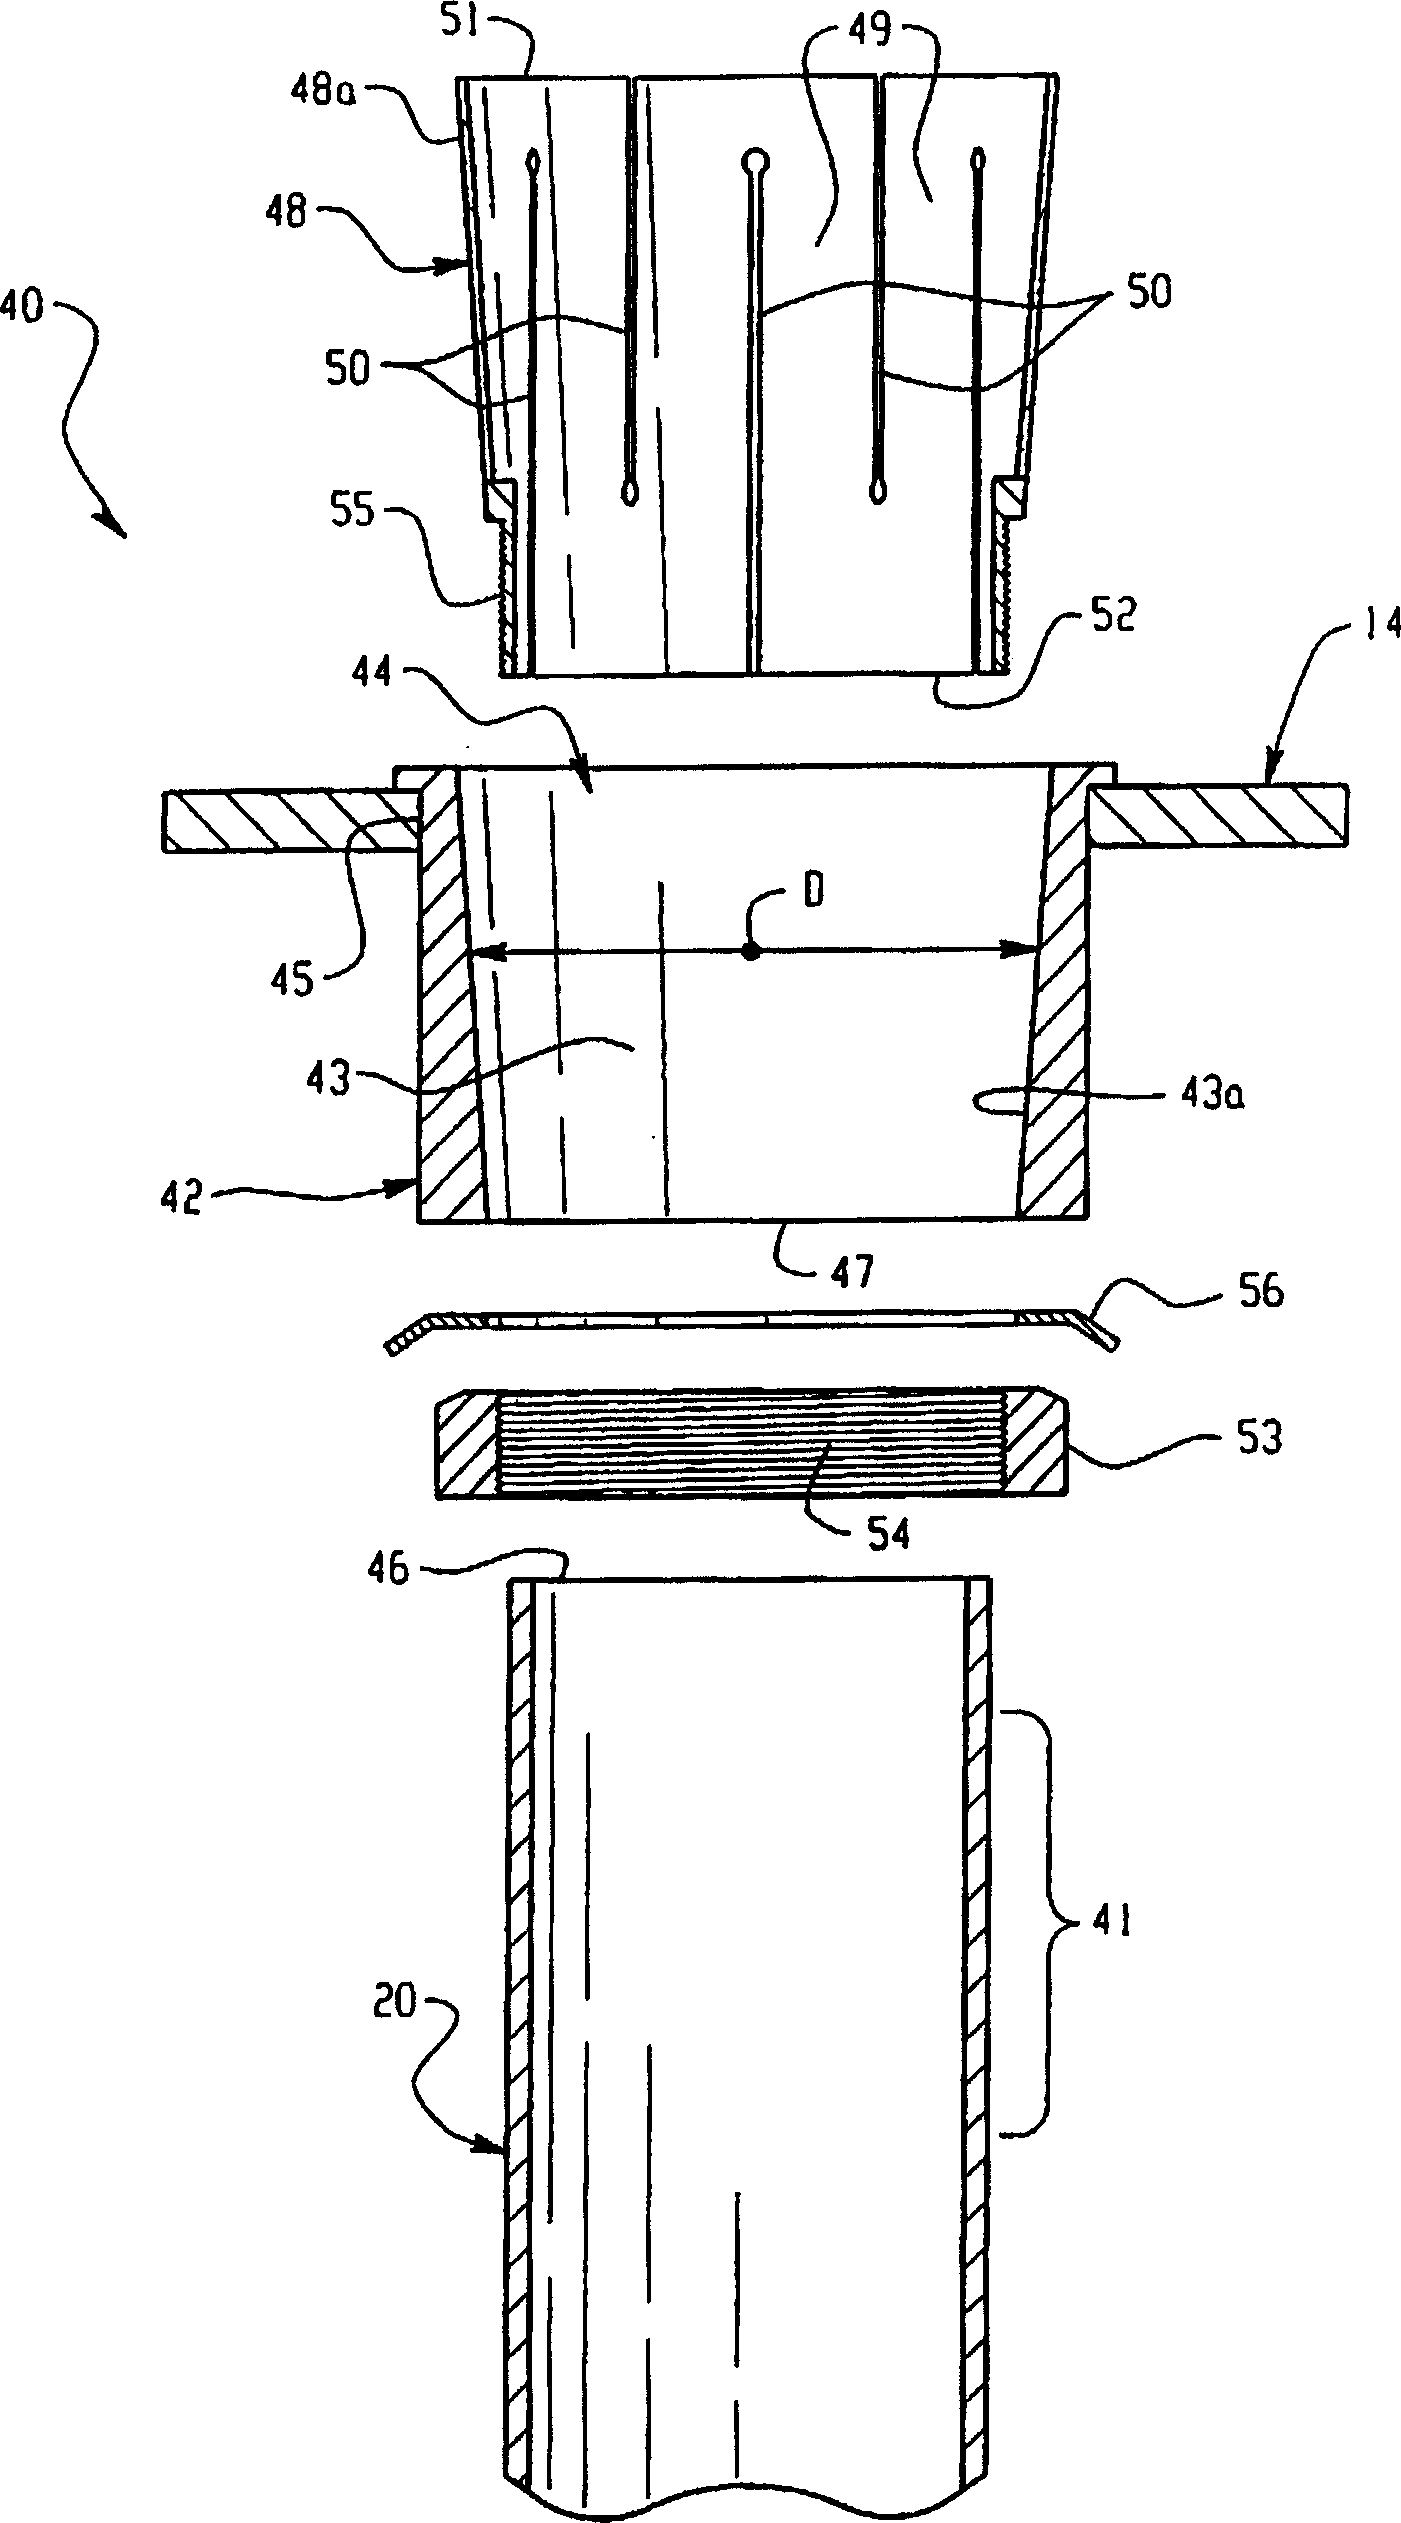 Surgical suspension system